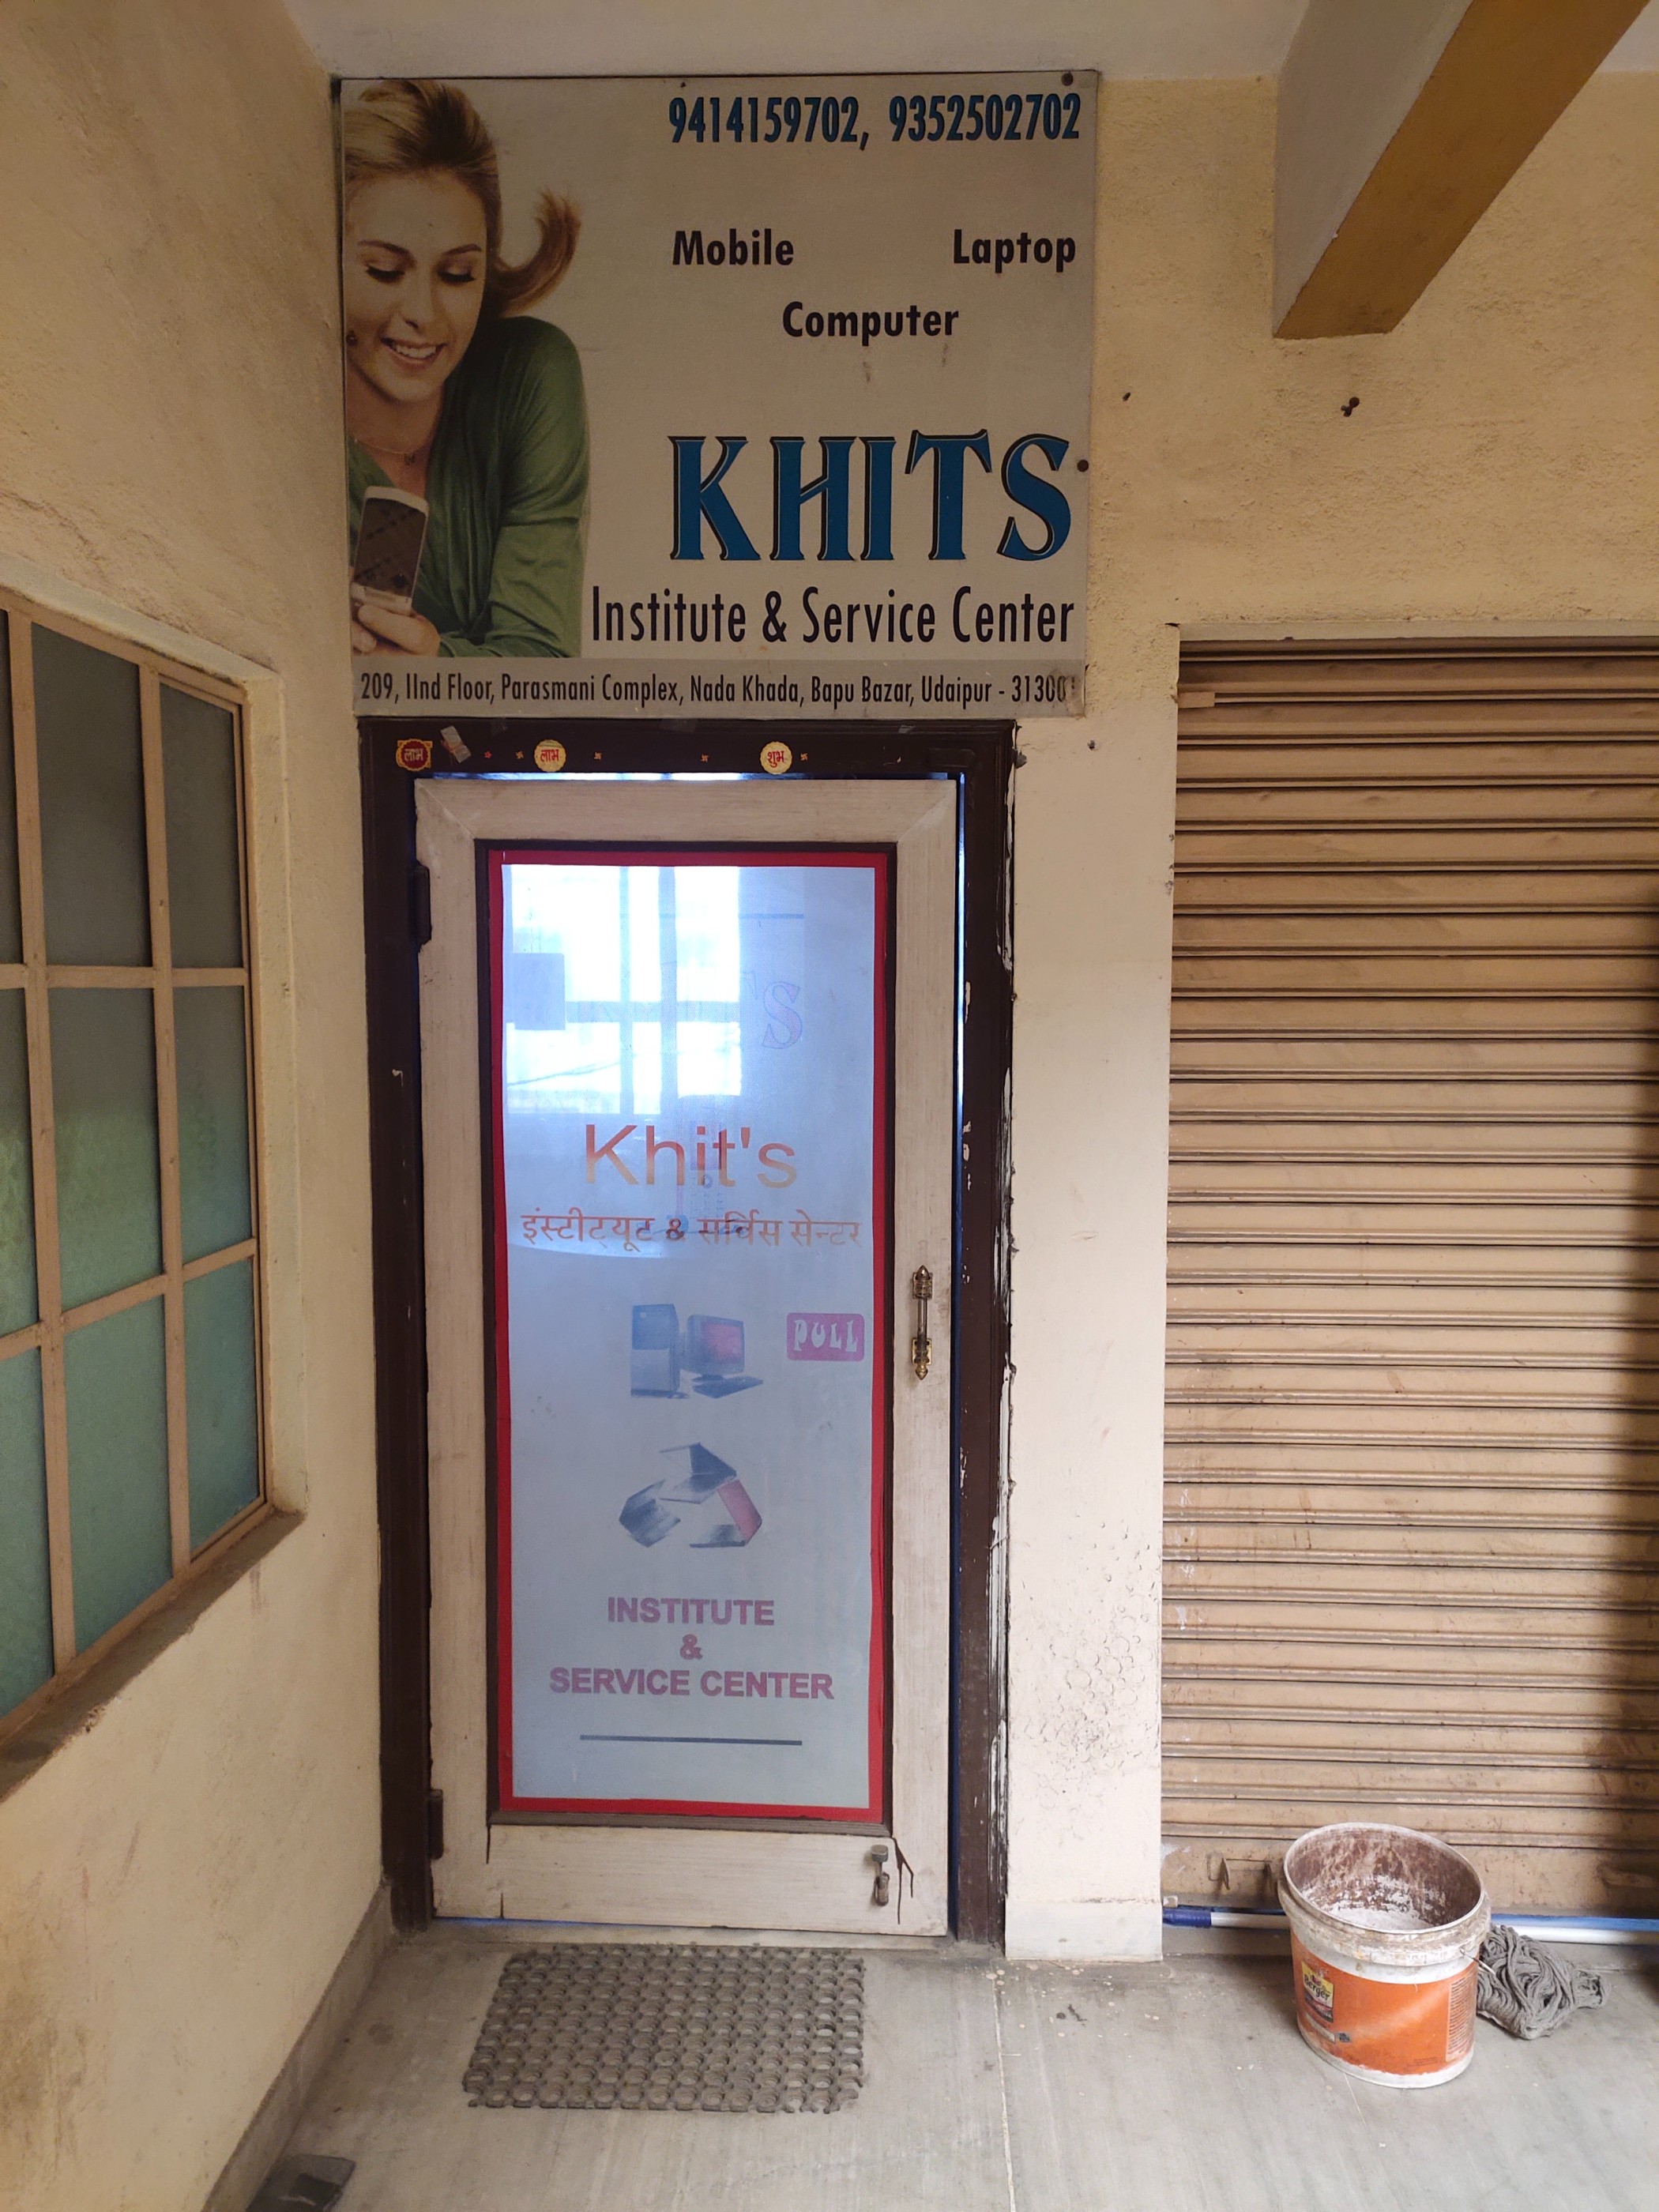 Actual Photos of Khits Mobile Repairing Institute and Service Center, Udaipur, Rajasthan